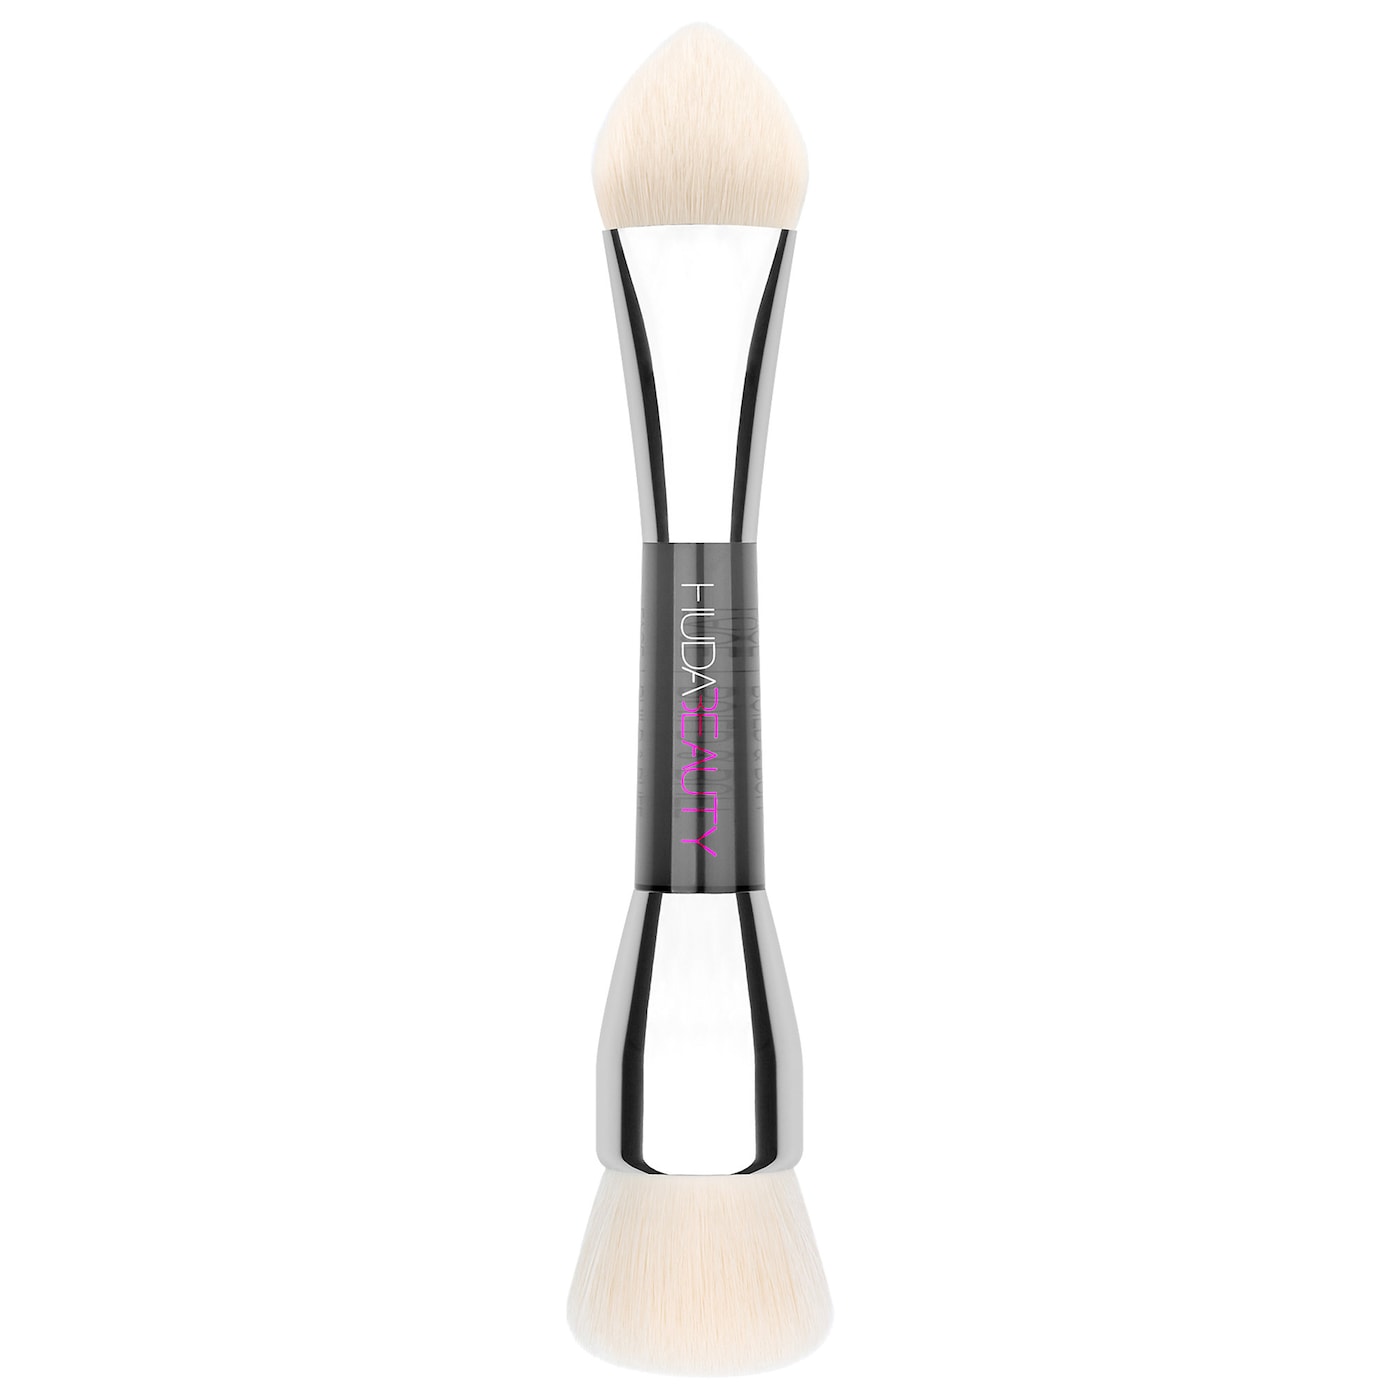 Huda Beauty - Build and Buff Double Ended Foundation Brush